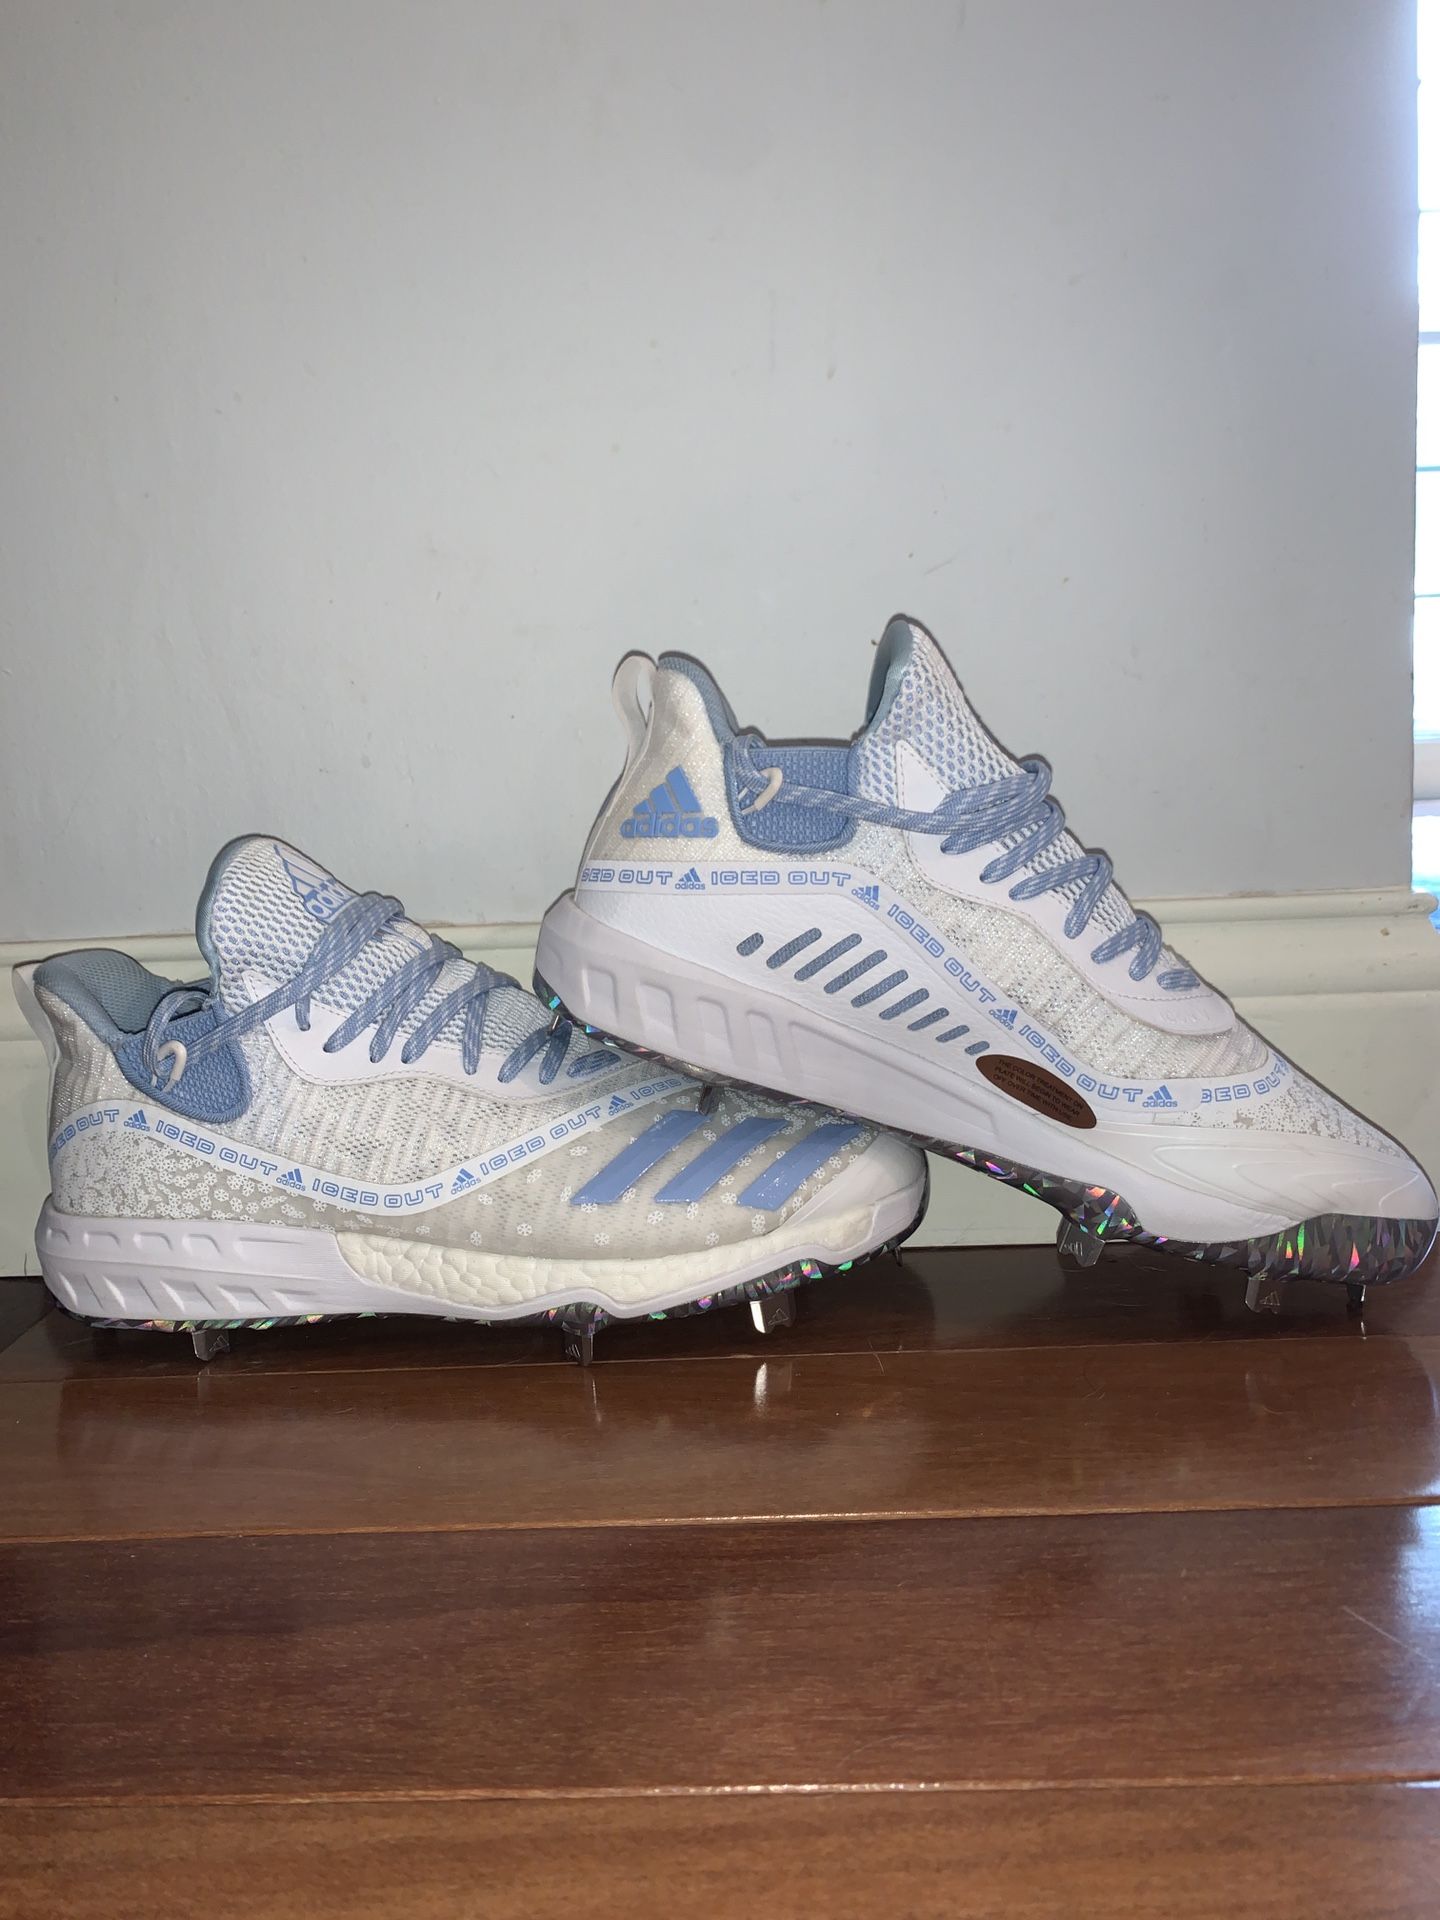 LIMITED EDITION Size 12 Adidas Iced Out Baseball Cleats